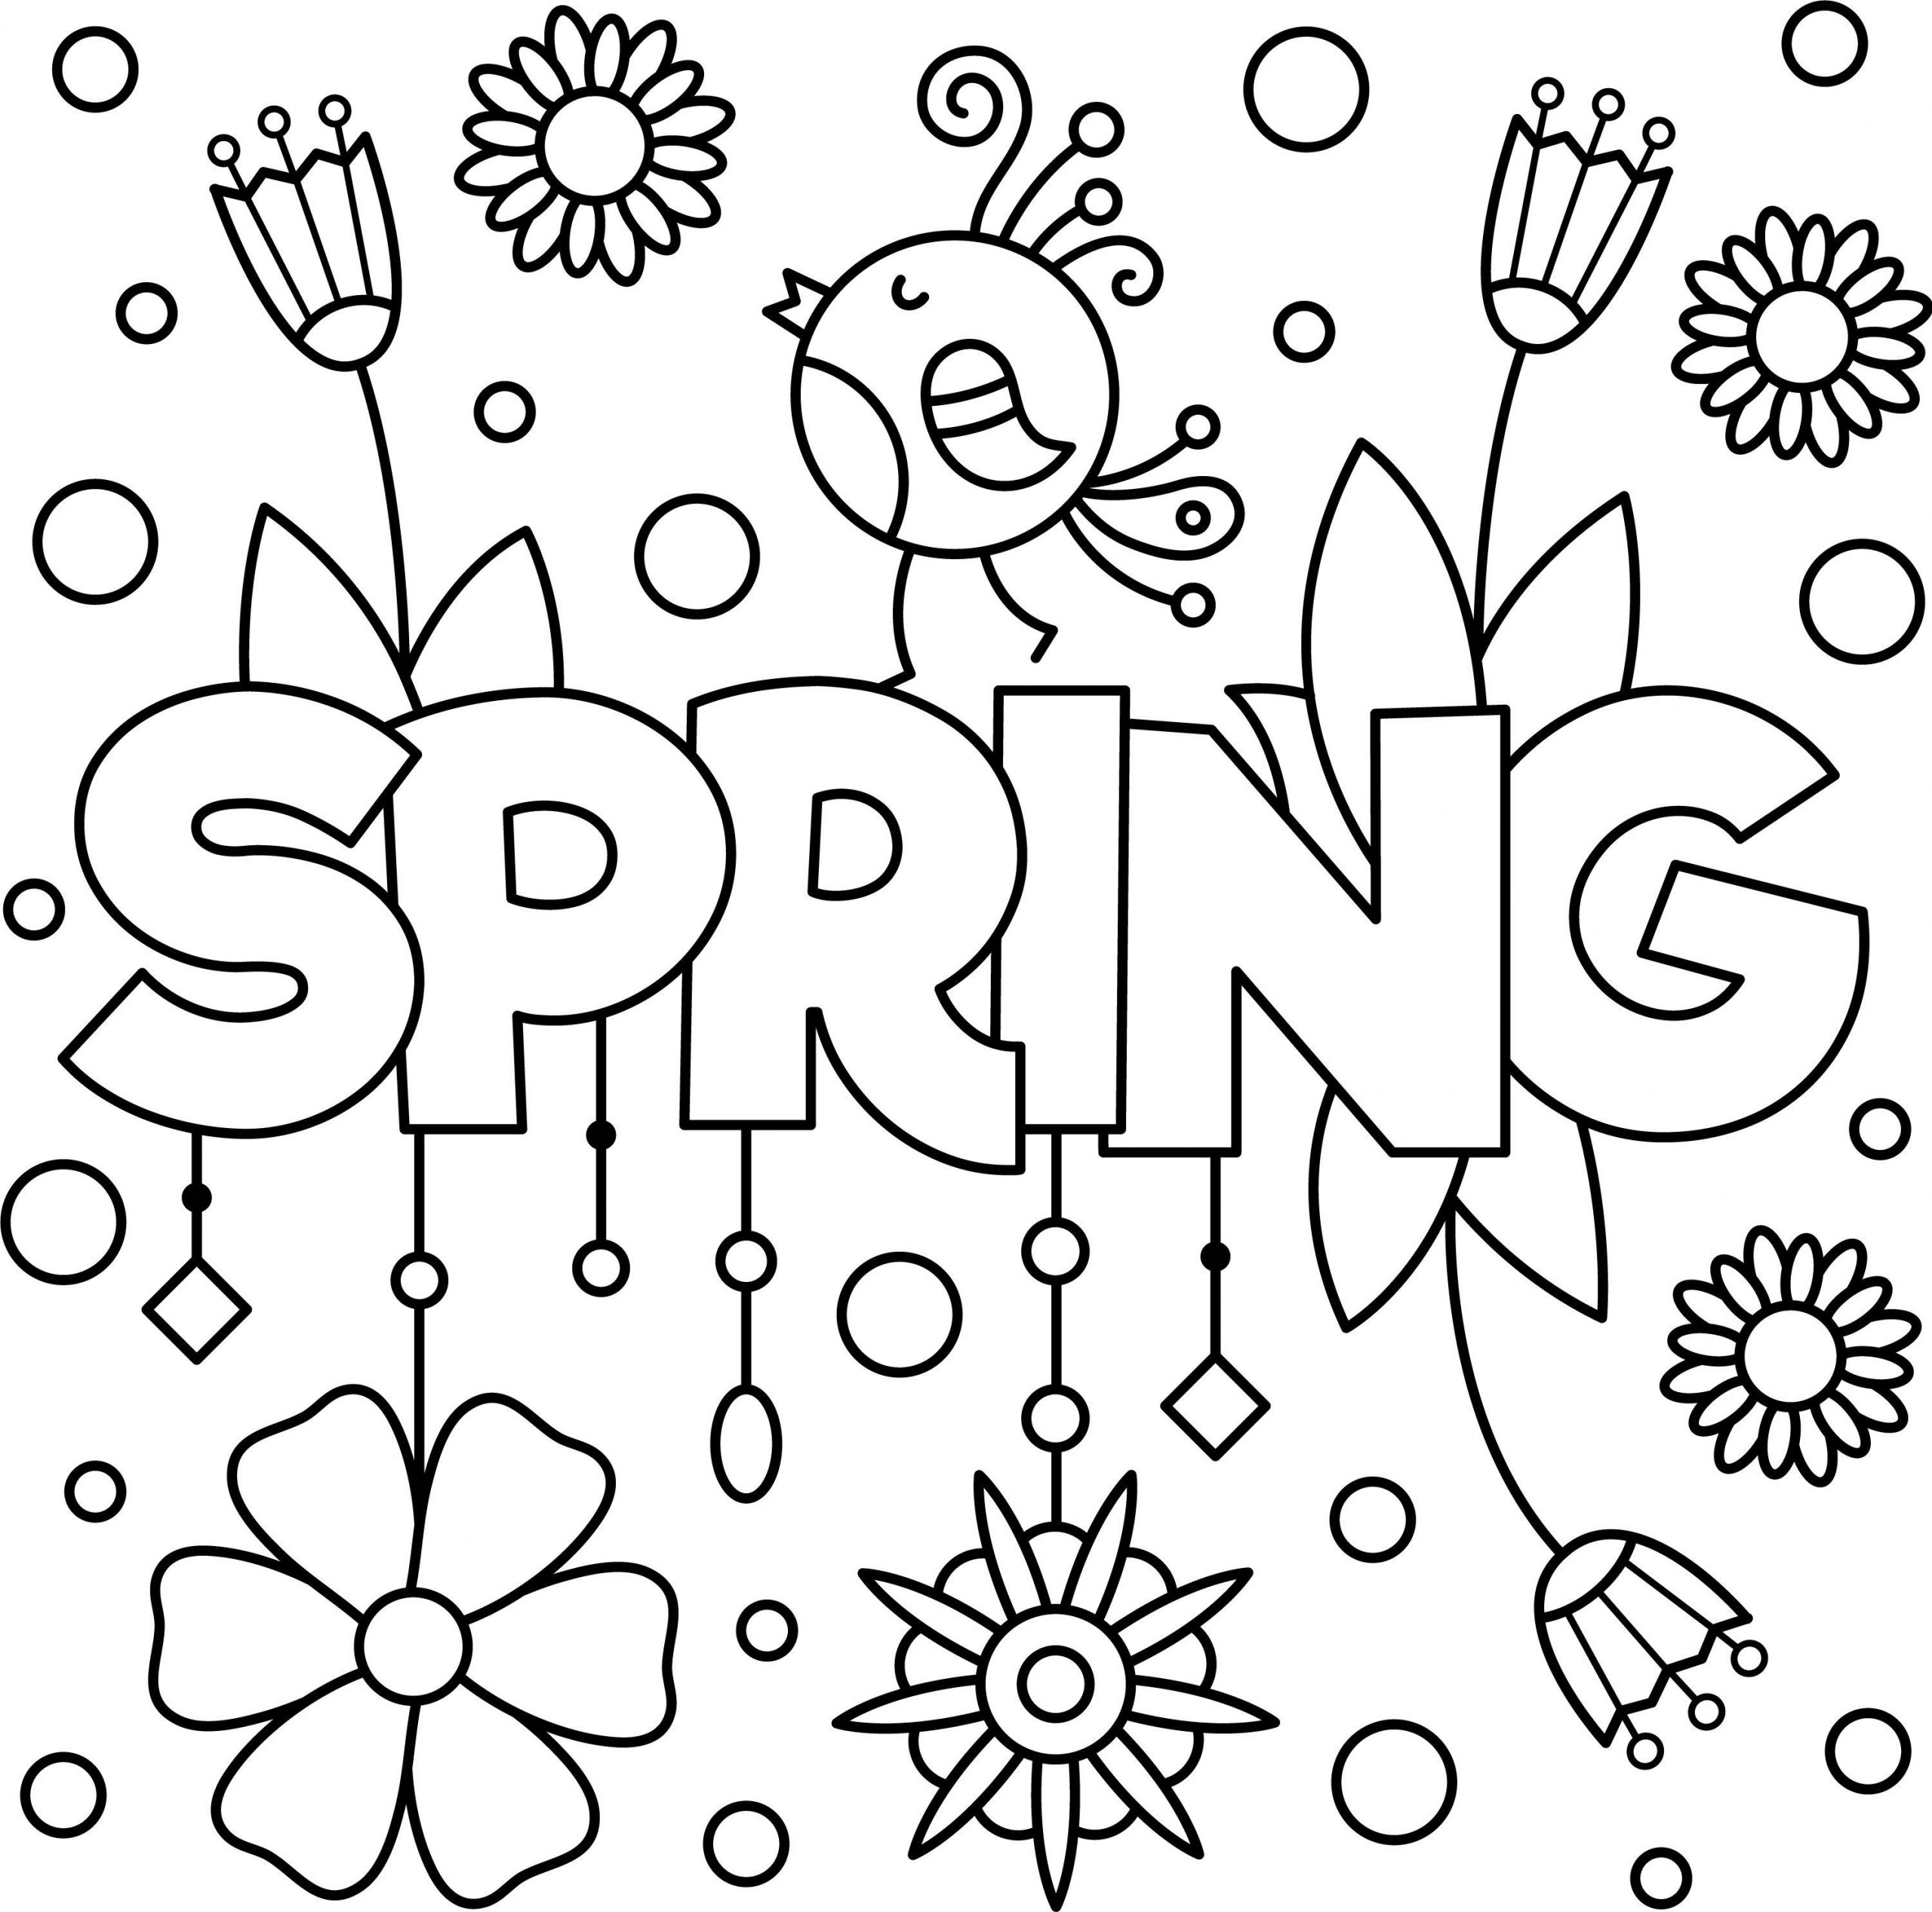 coloring-pages-spring-coloring-pages-for-kids-disneyntable-pictures